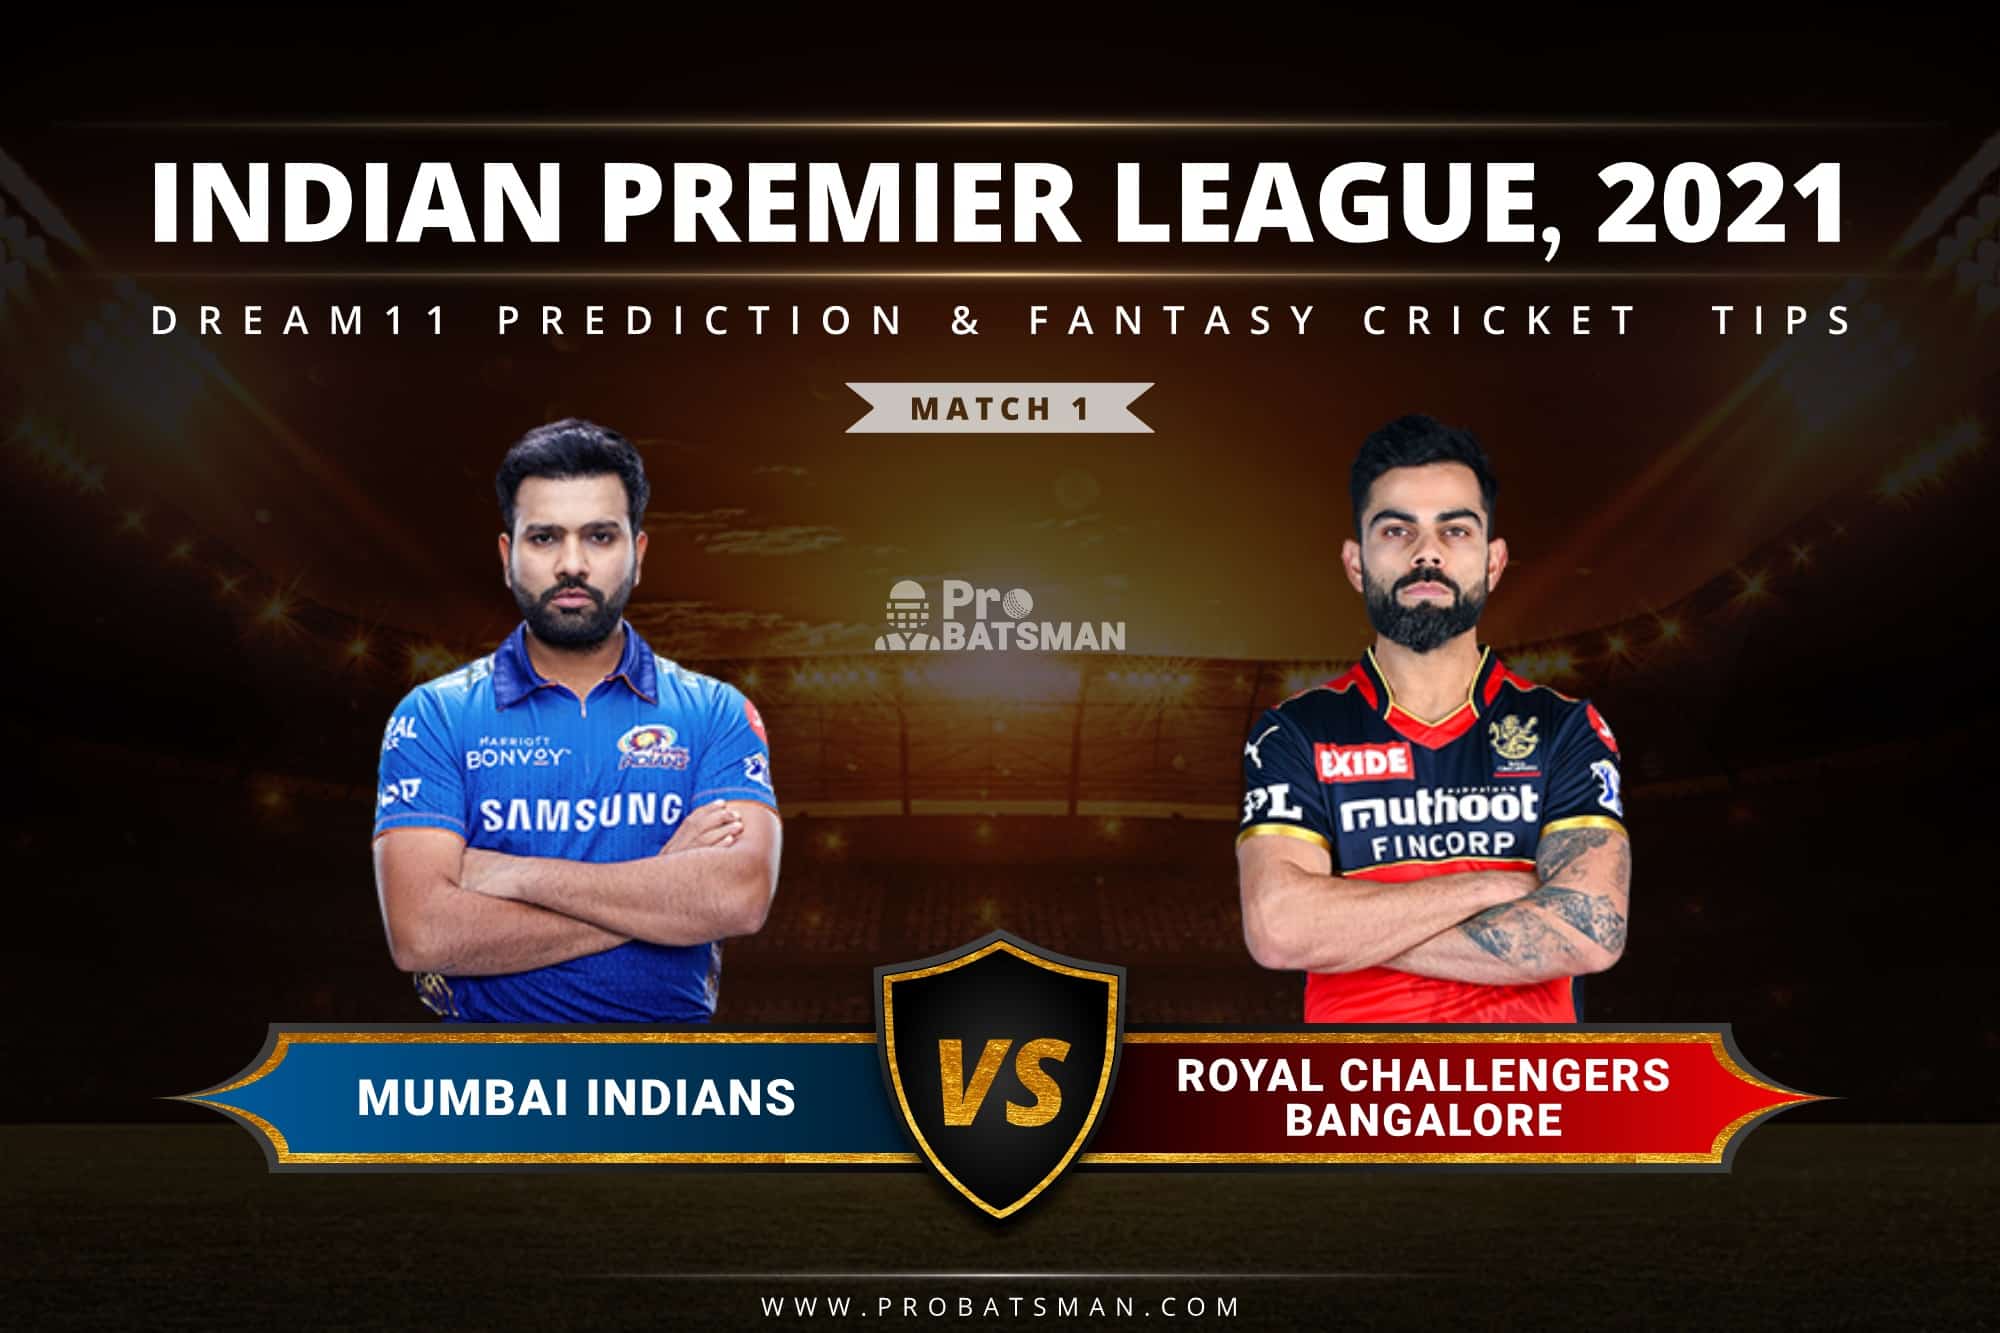 MI vs RCB Dream11 Prediction: Fantasy Cricket Tips, Playing XI, Pitch Report, Stats, Match & Injury Updates, Indian Premier League (IPL) 2021